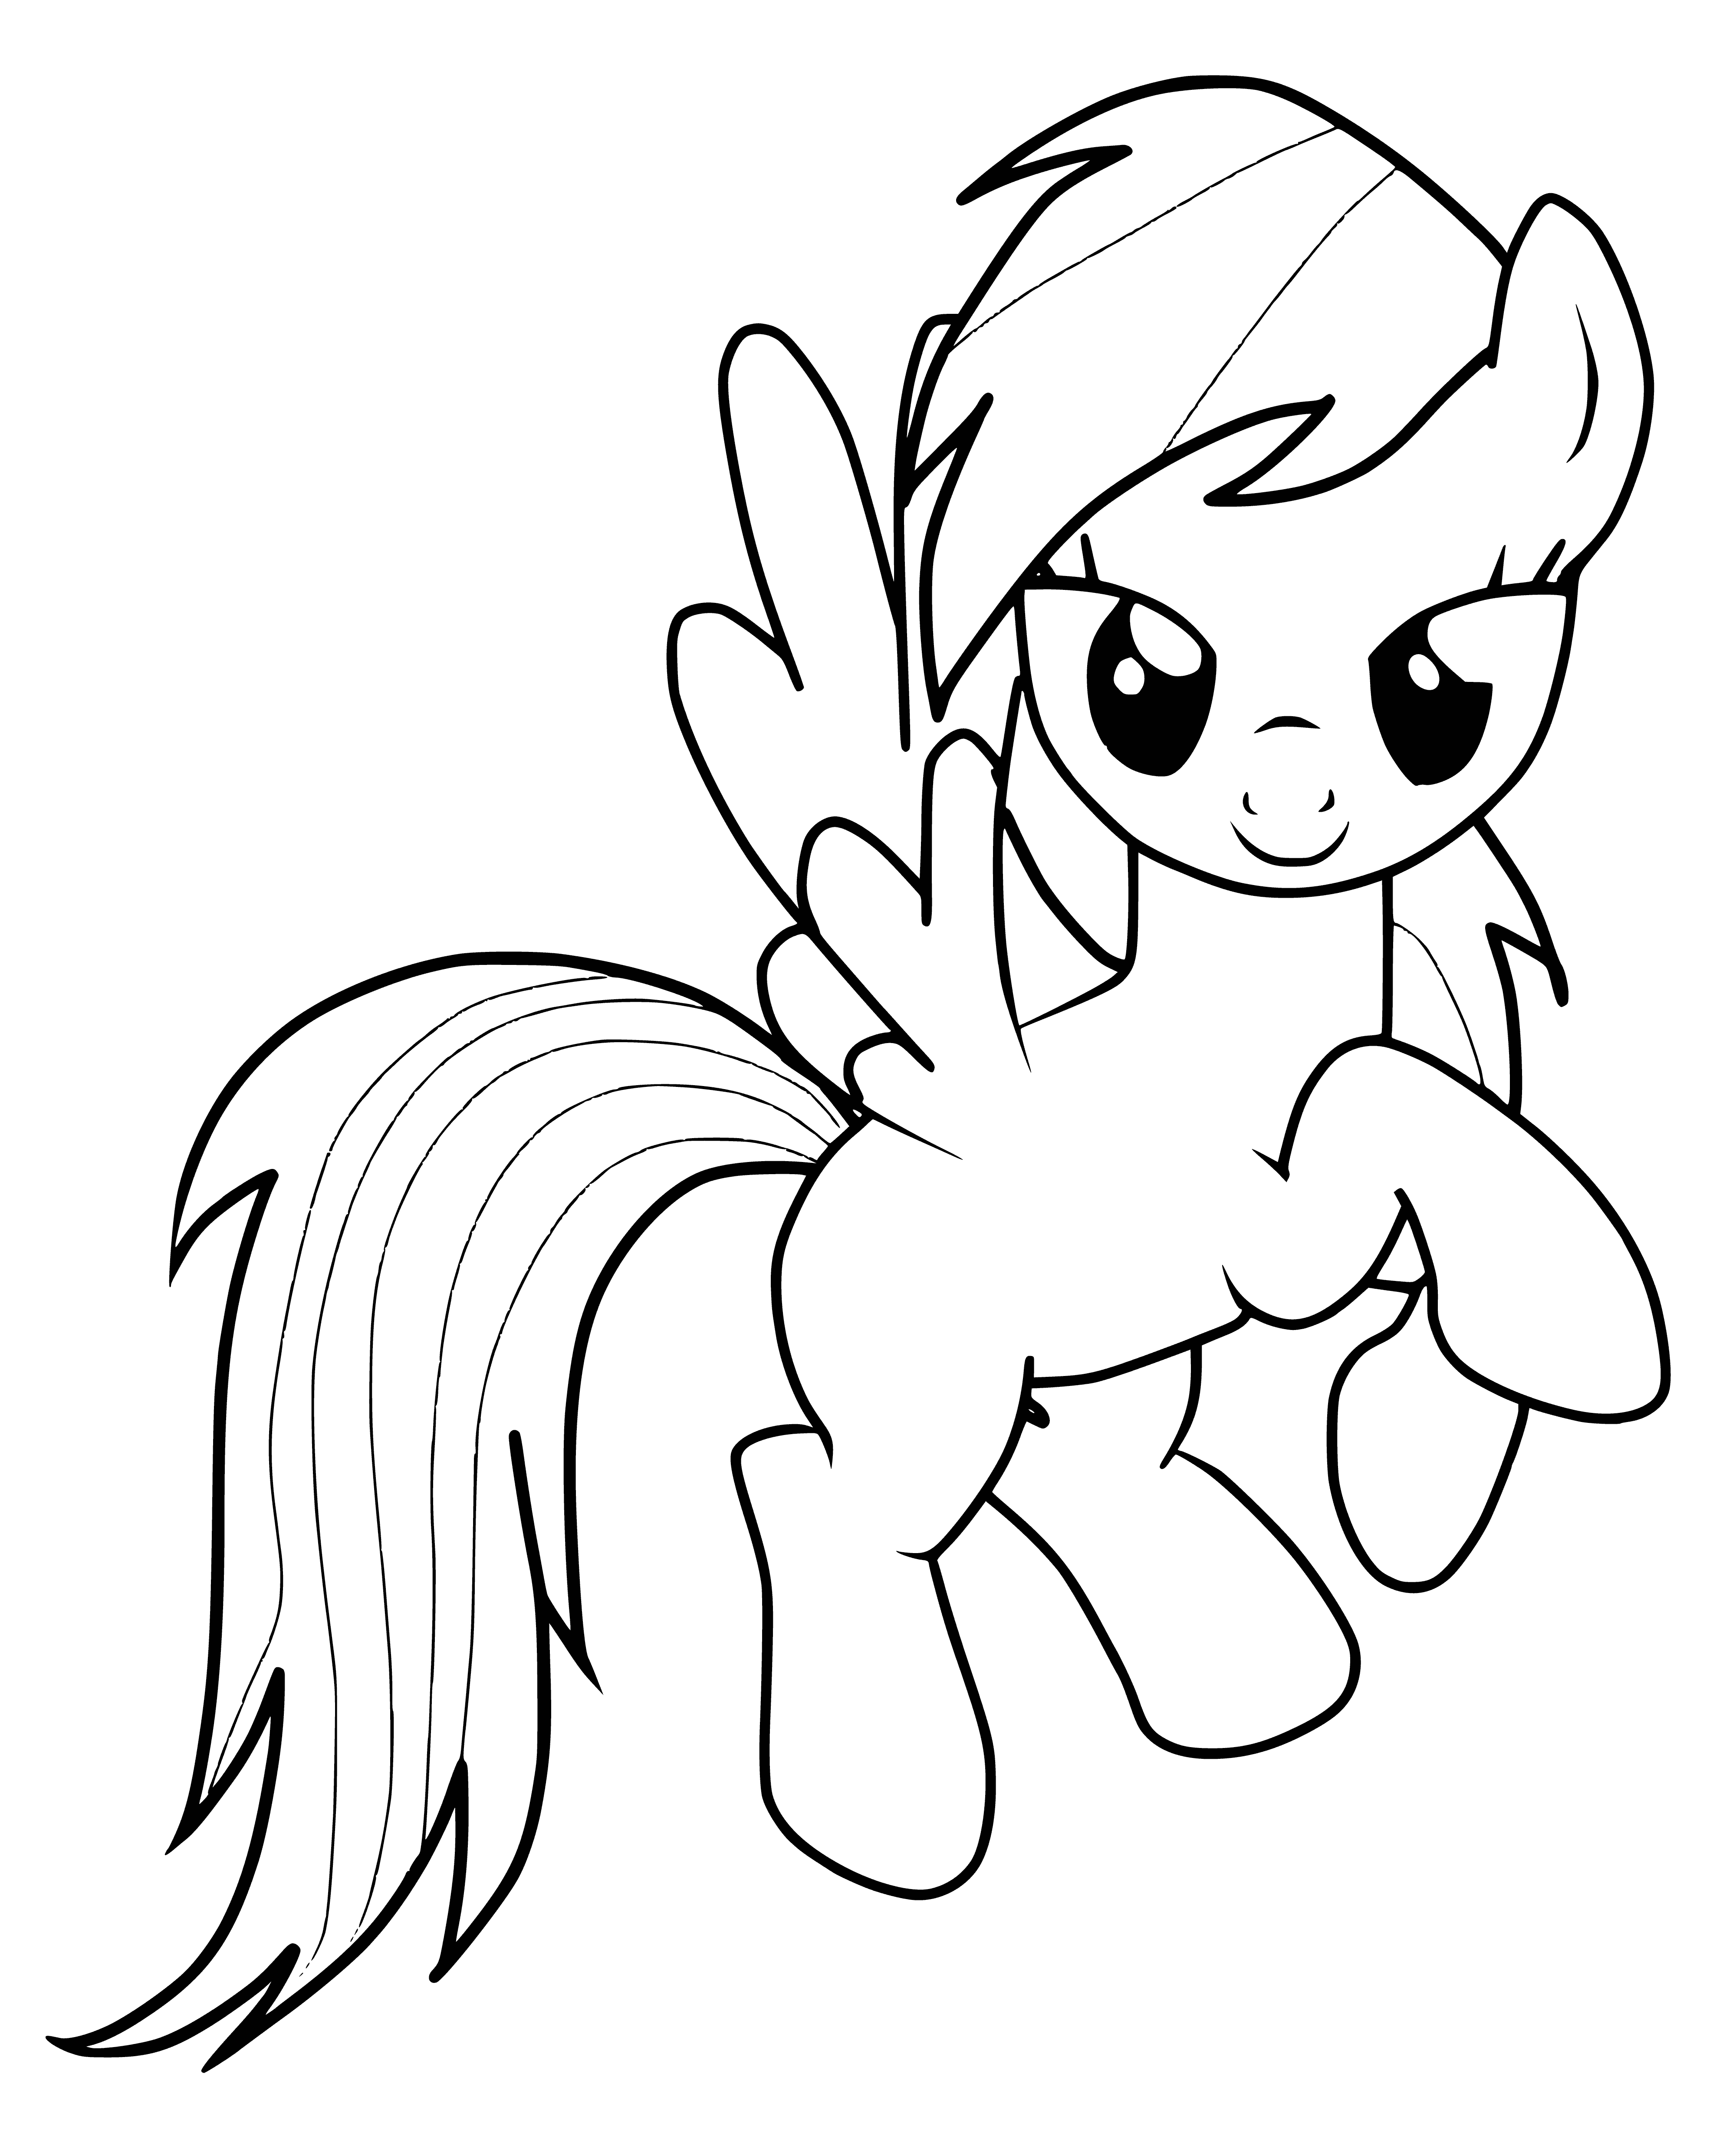 coloring page: Rainbow Dash is brave, loyal & determined in MLP: Friendship is Magic. She's a loyal friend to her fellow ponies & has a rainbow lightning bolt cutie mark.